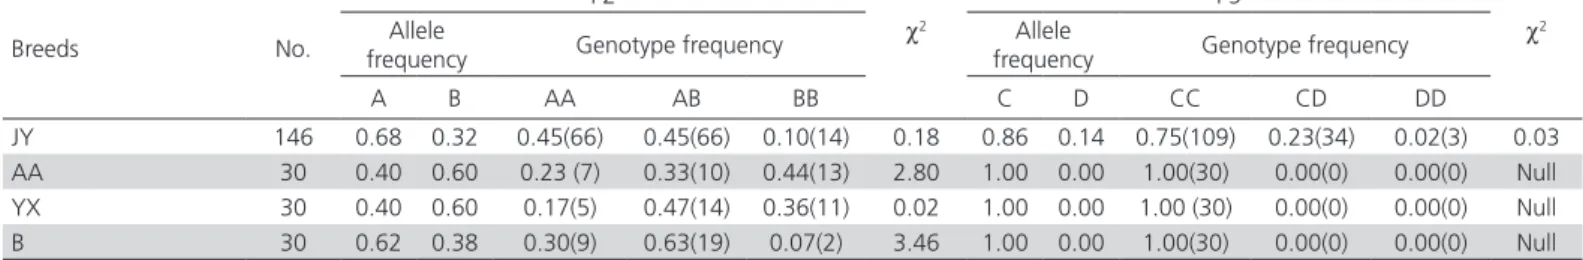 Table 2 – Distribution of genotypes and allele frequencies in four chicken breeds